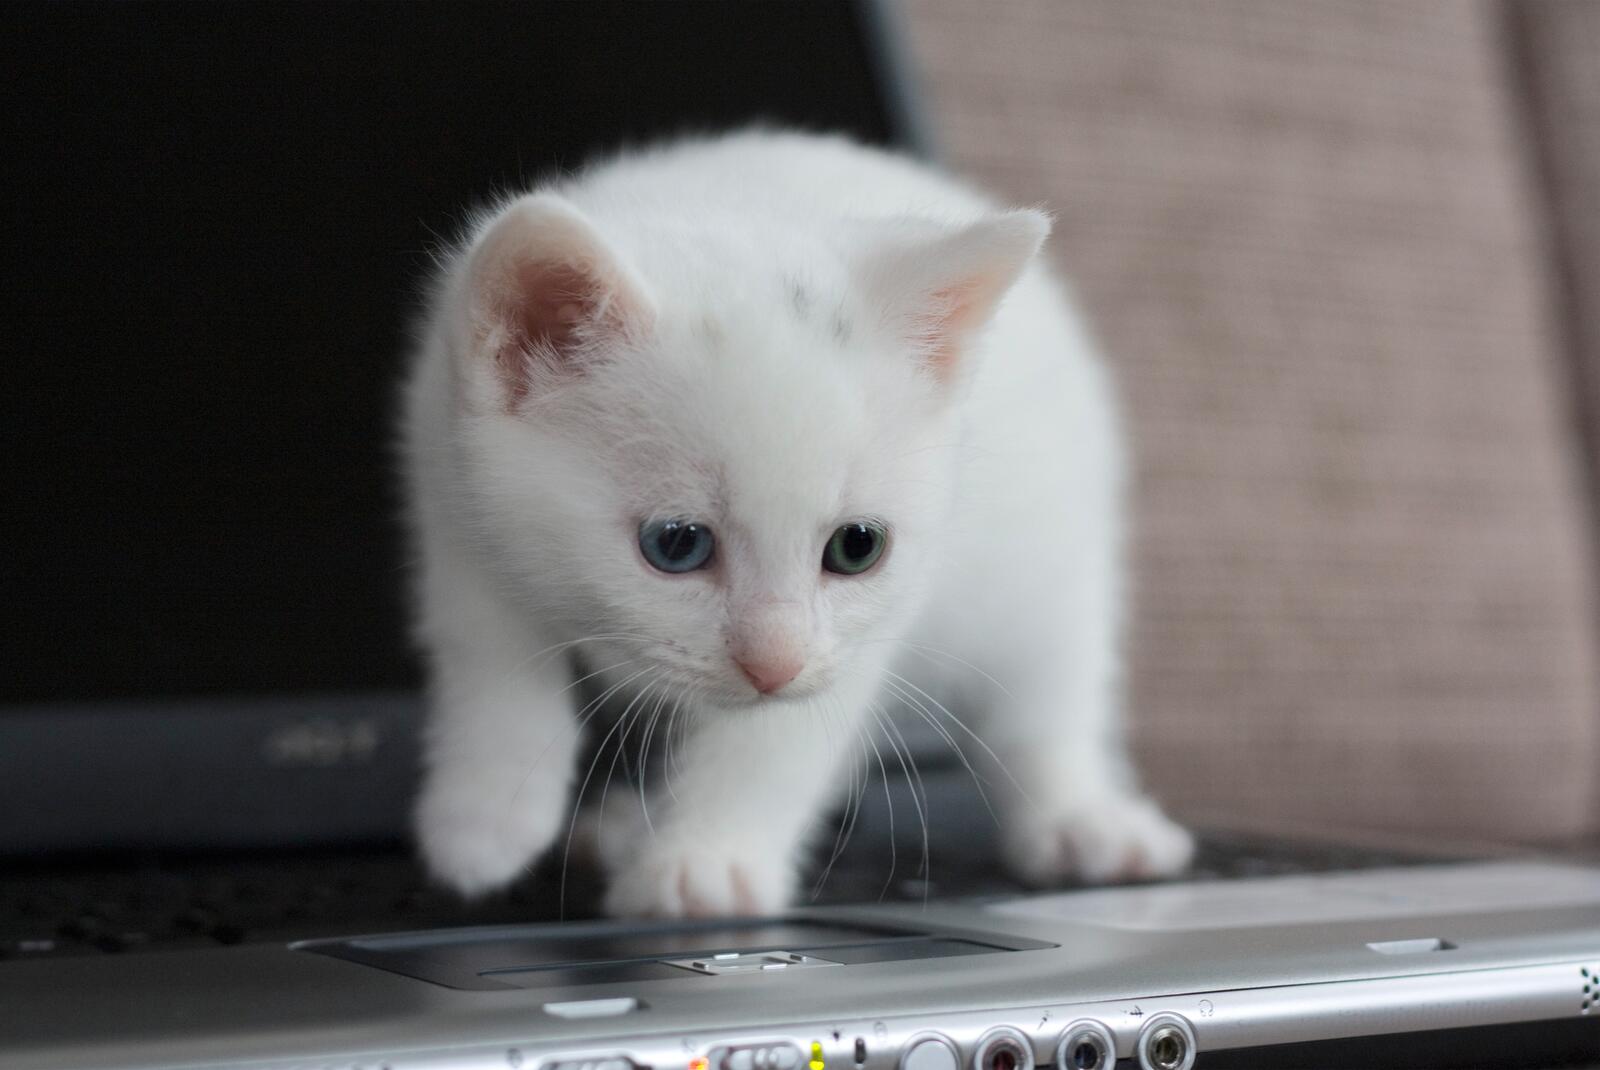 Free photo The white kitten is standing on the keyboard